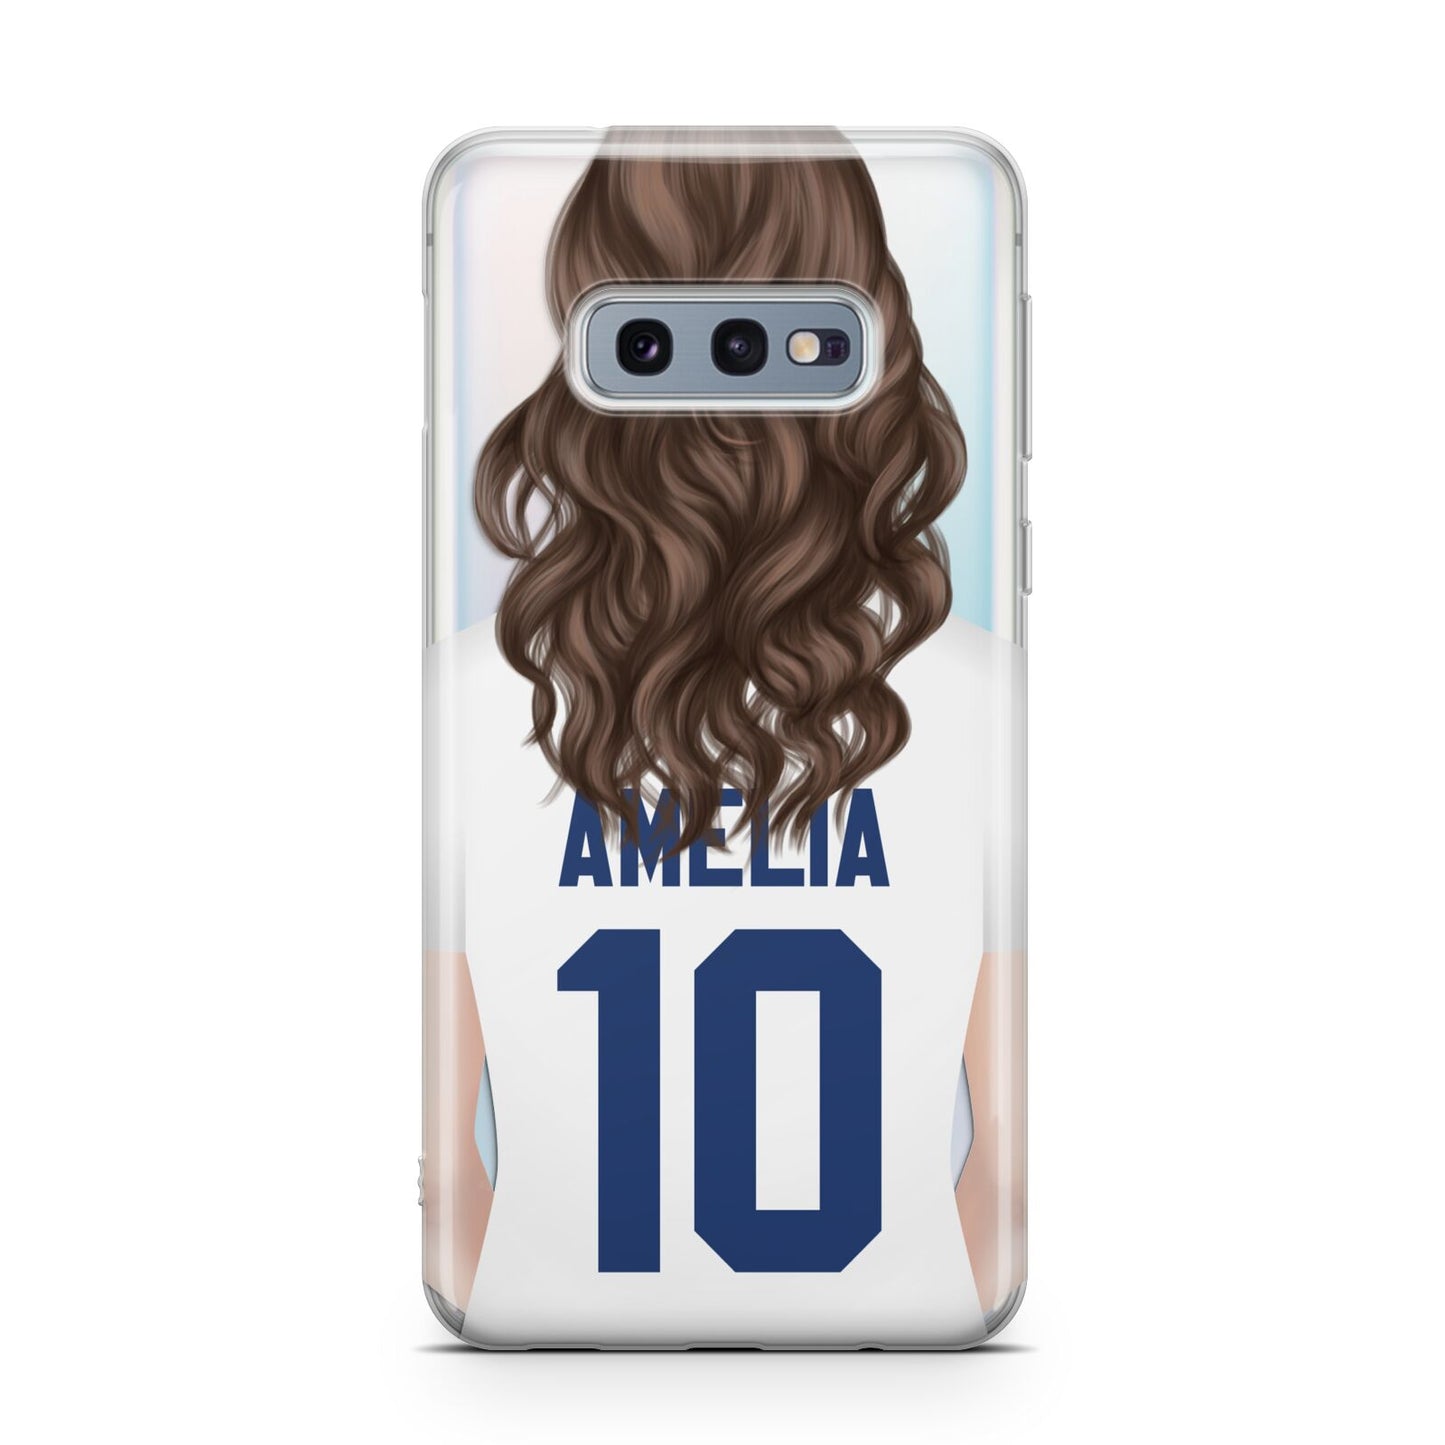 Womens Footballer Personalised Samsung Galaxy S10E Case